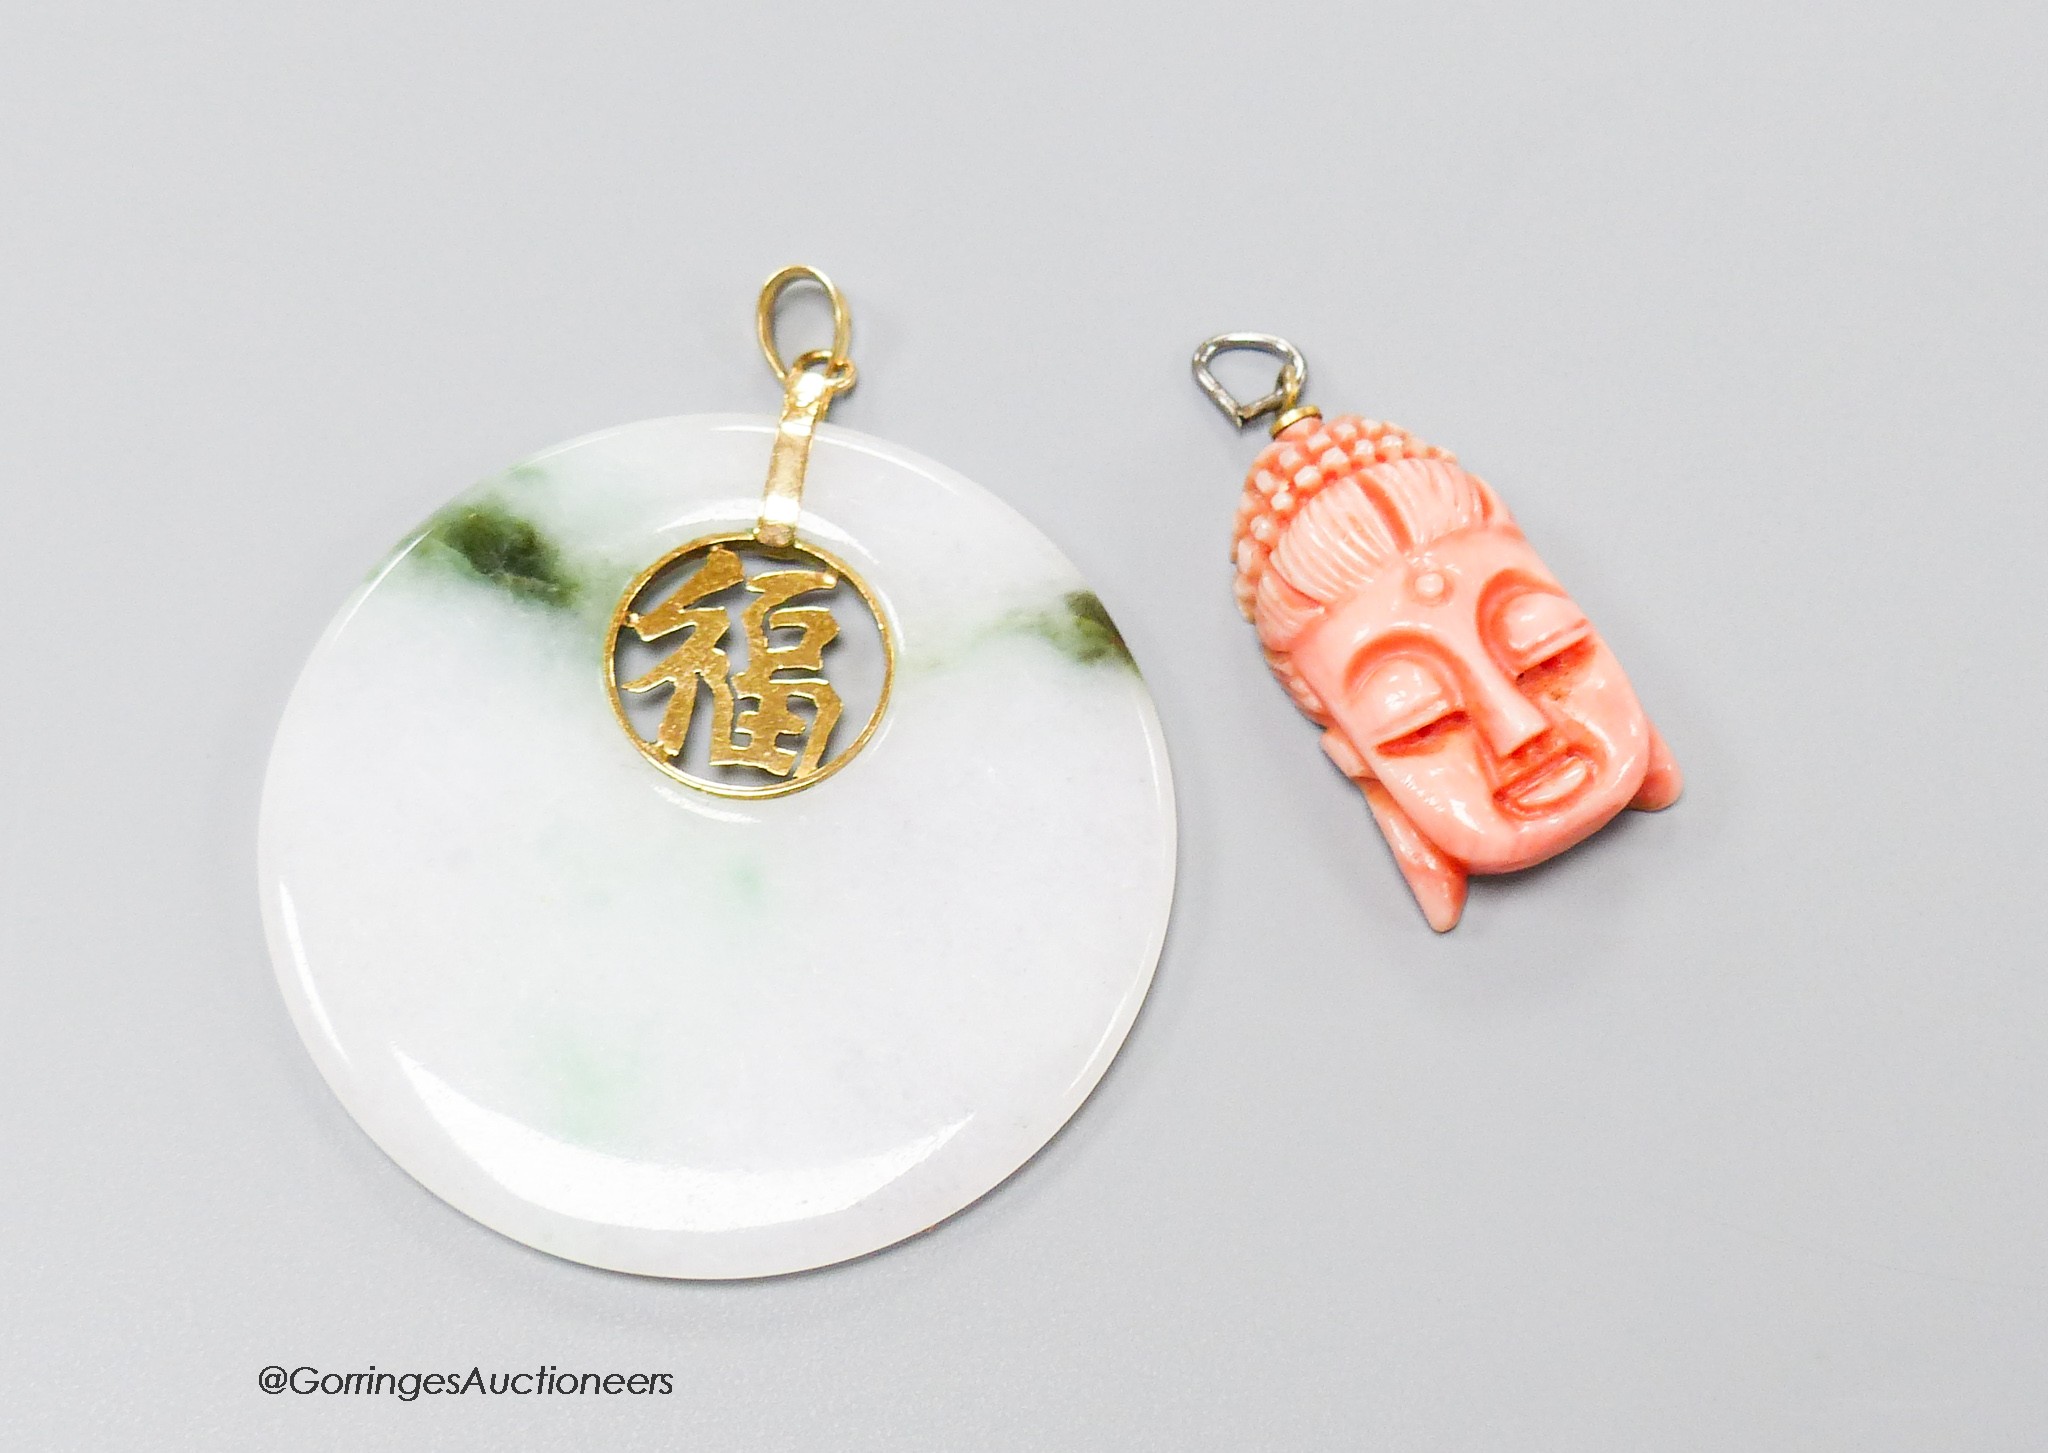 A Chinese jade disc pendant with inset yellow metal character and 14k bale, 46mm, and a carved coral mask pendant, 26mm.